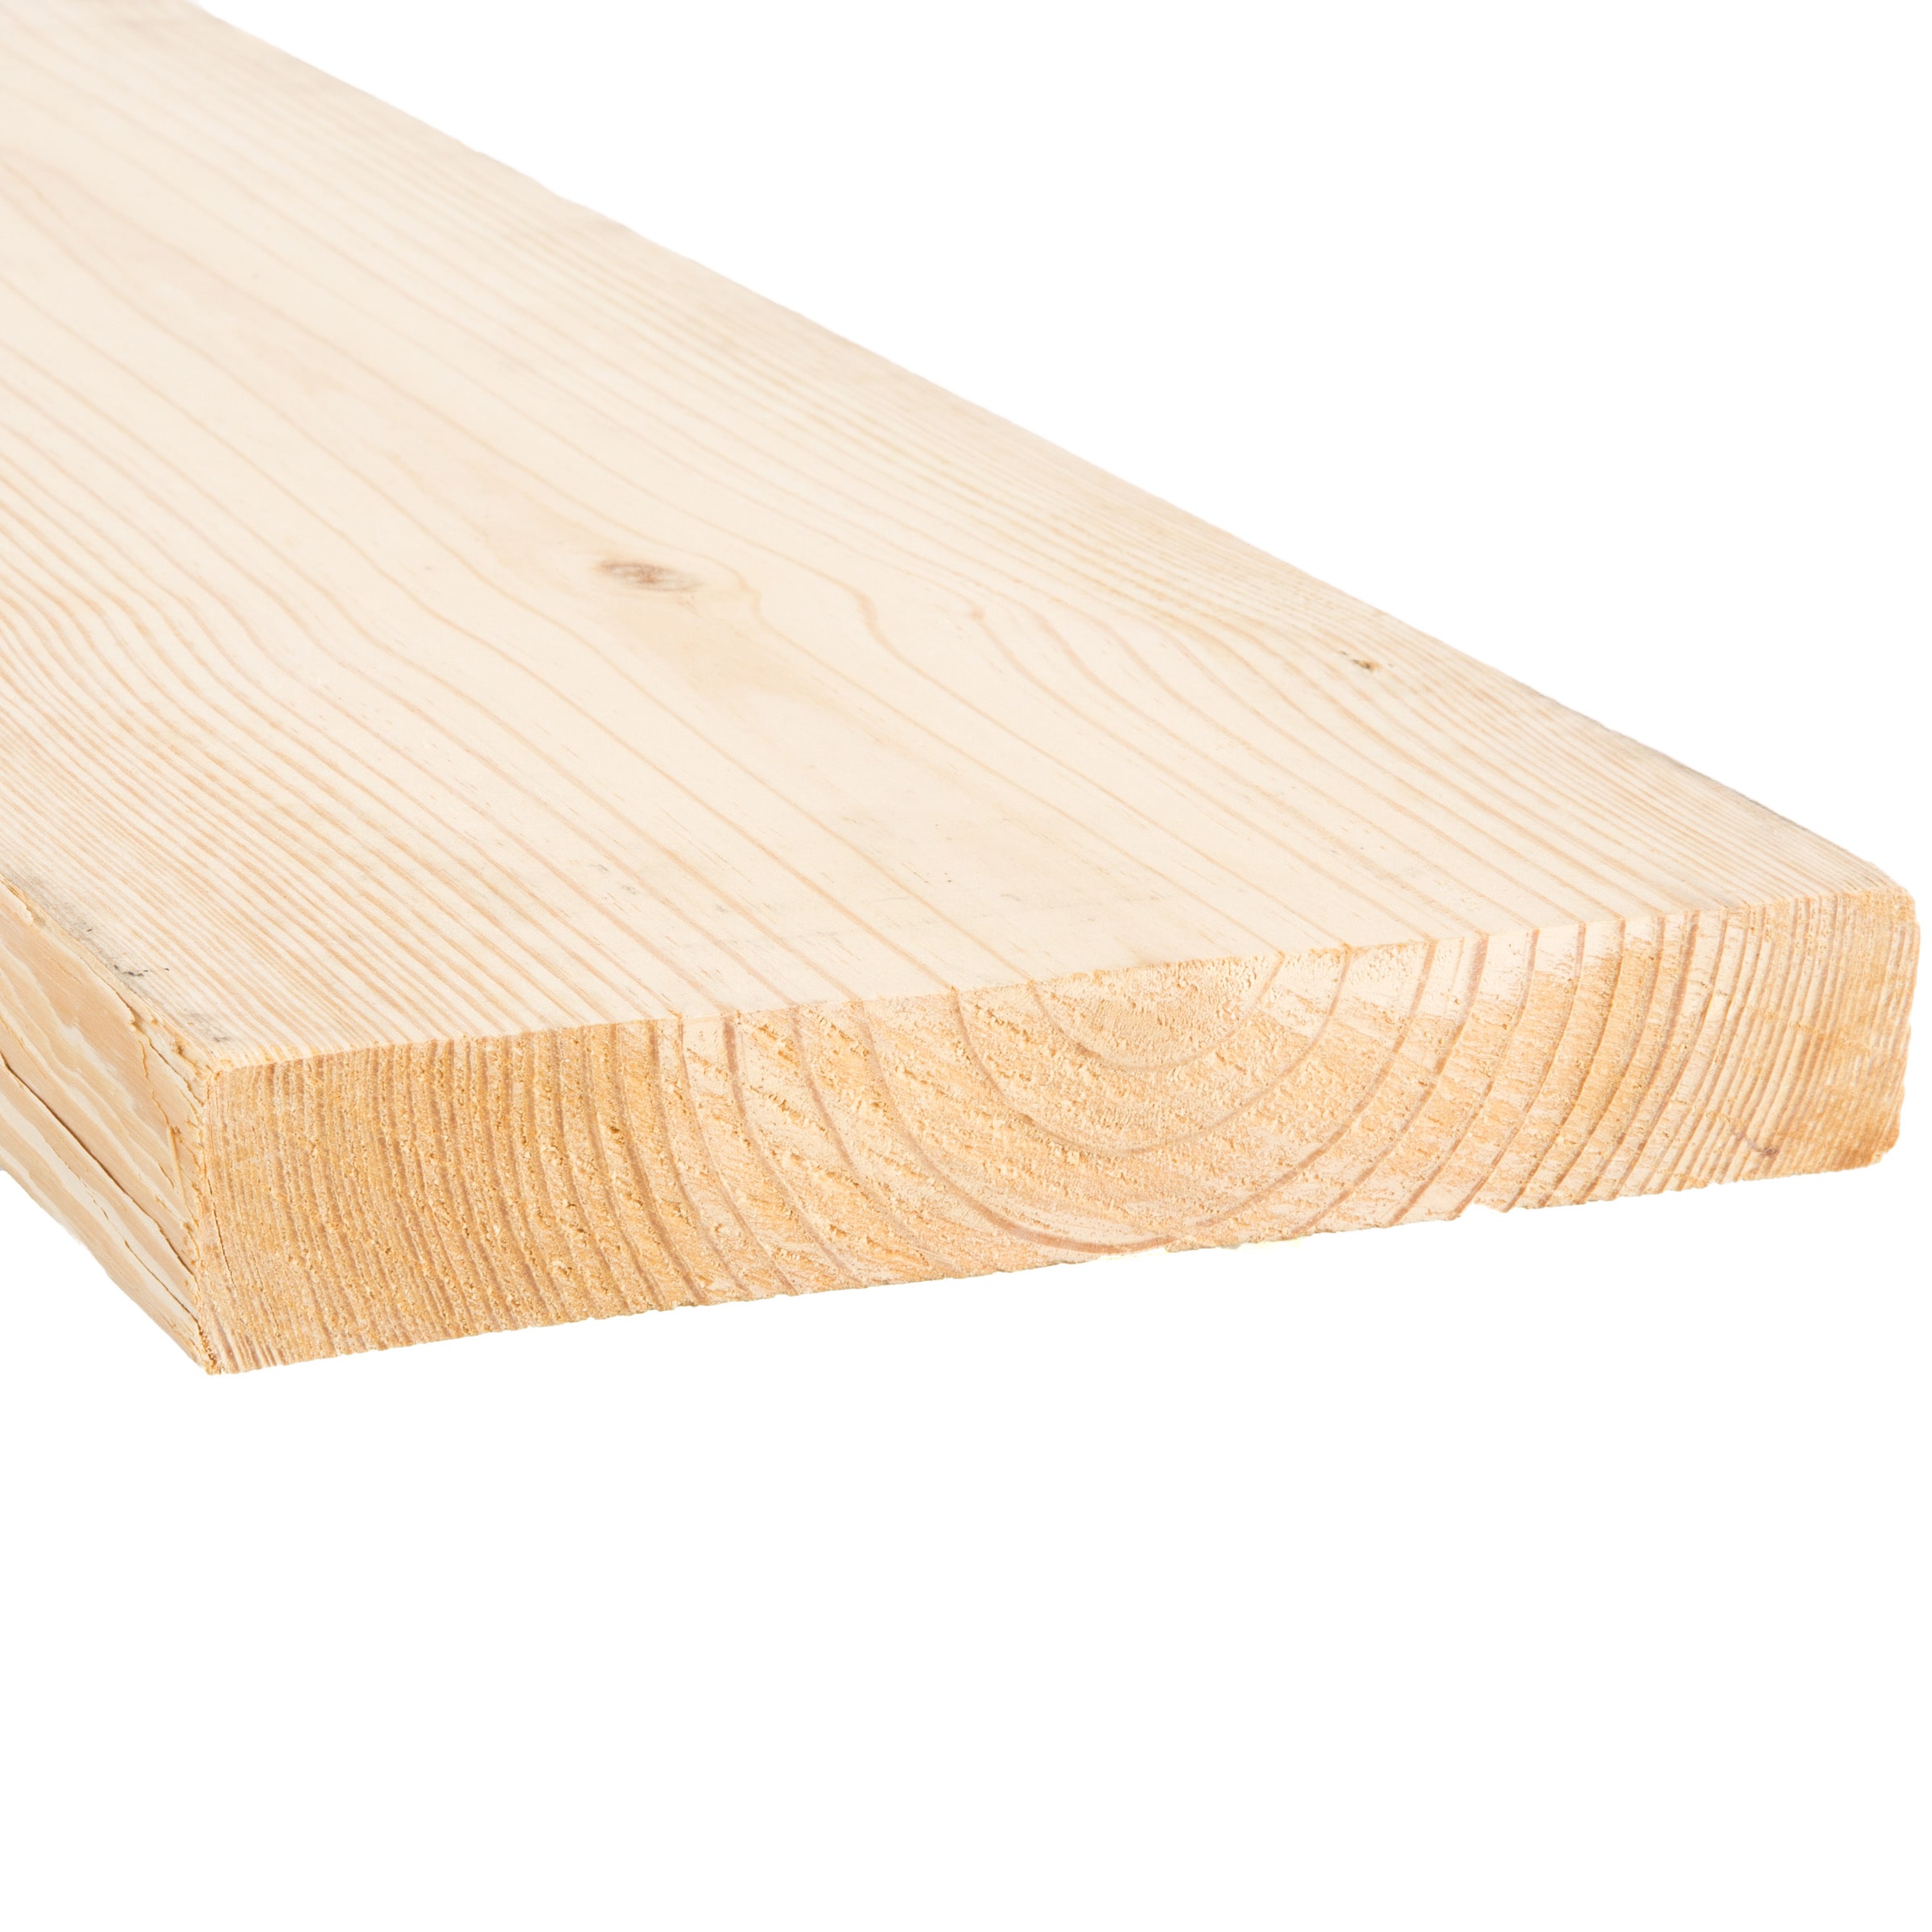 2-in x 10-in Dimensional Lumber at Lowes.com